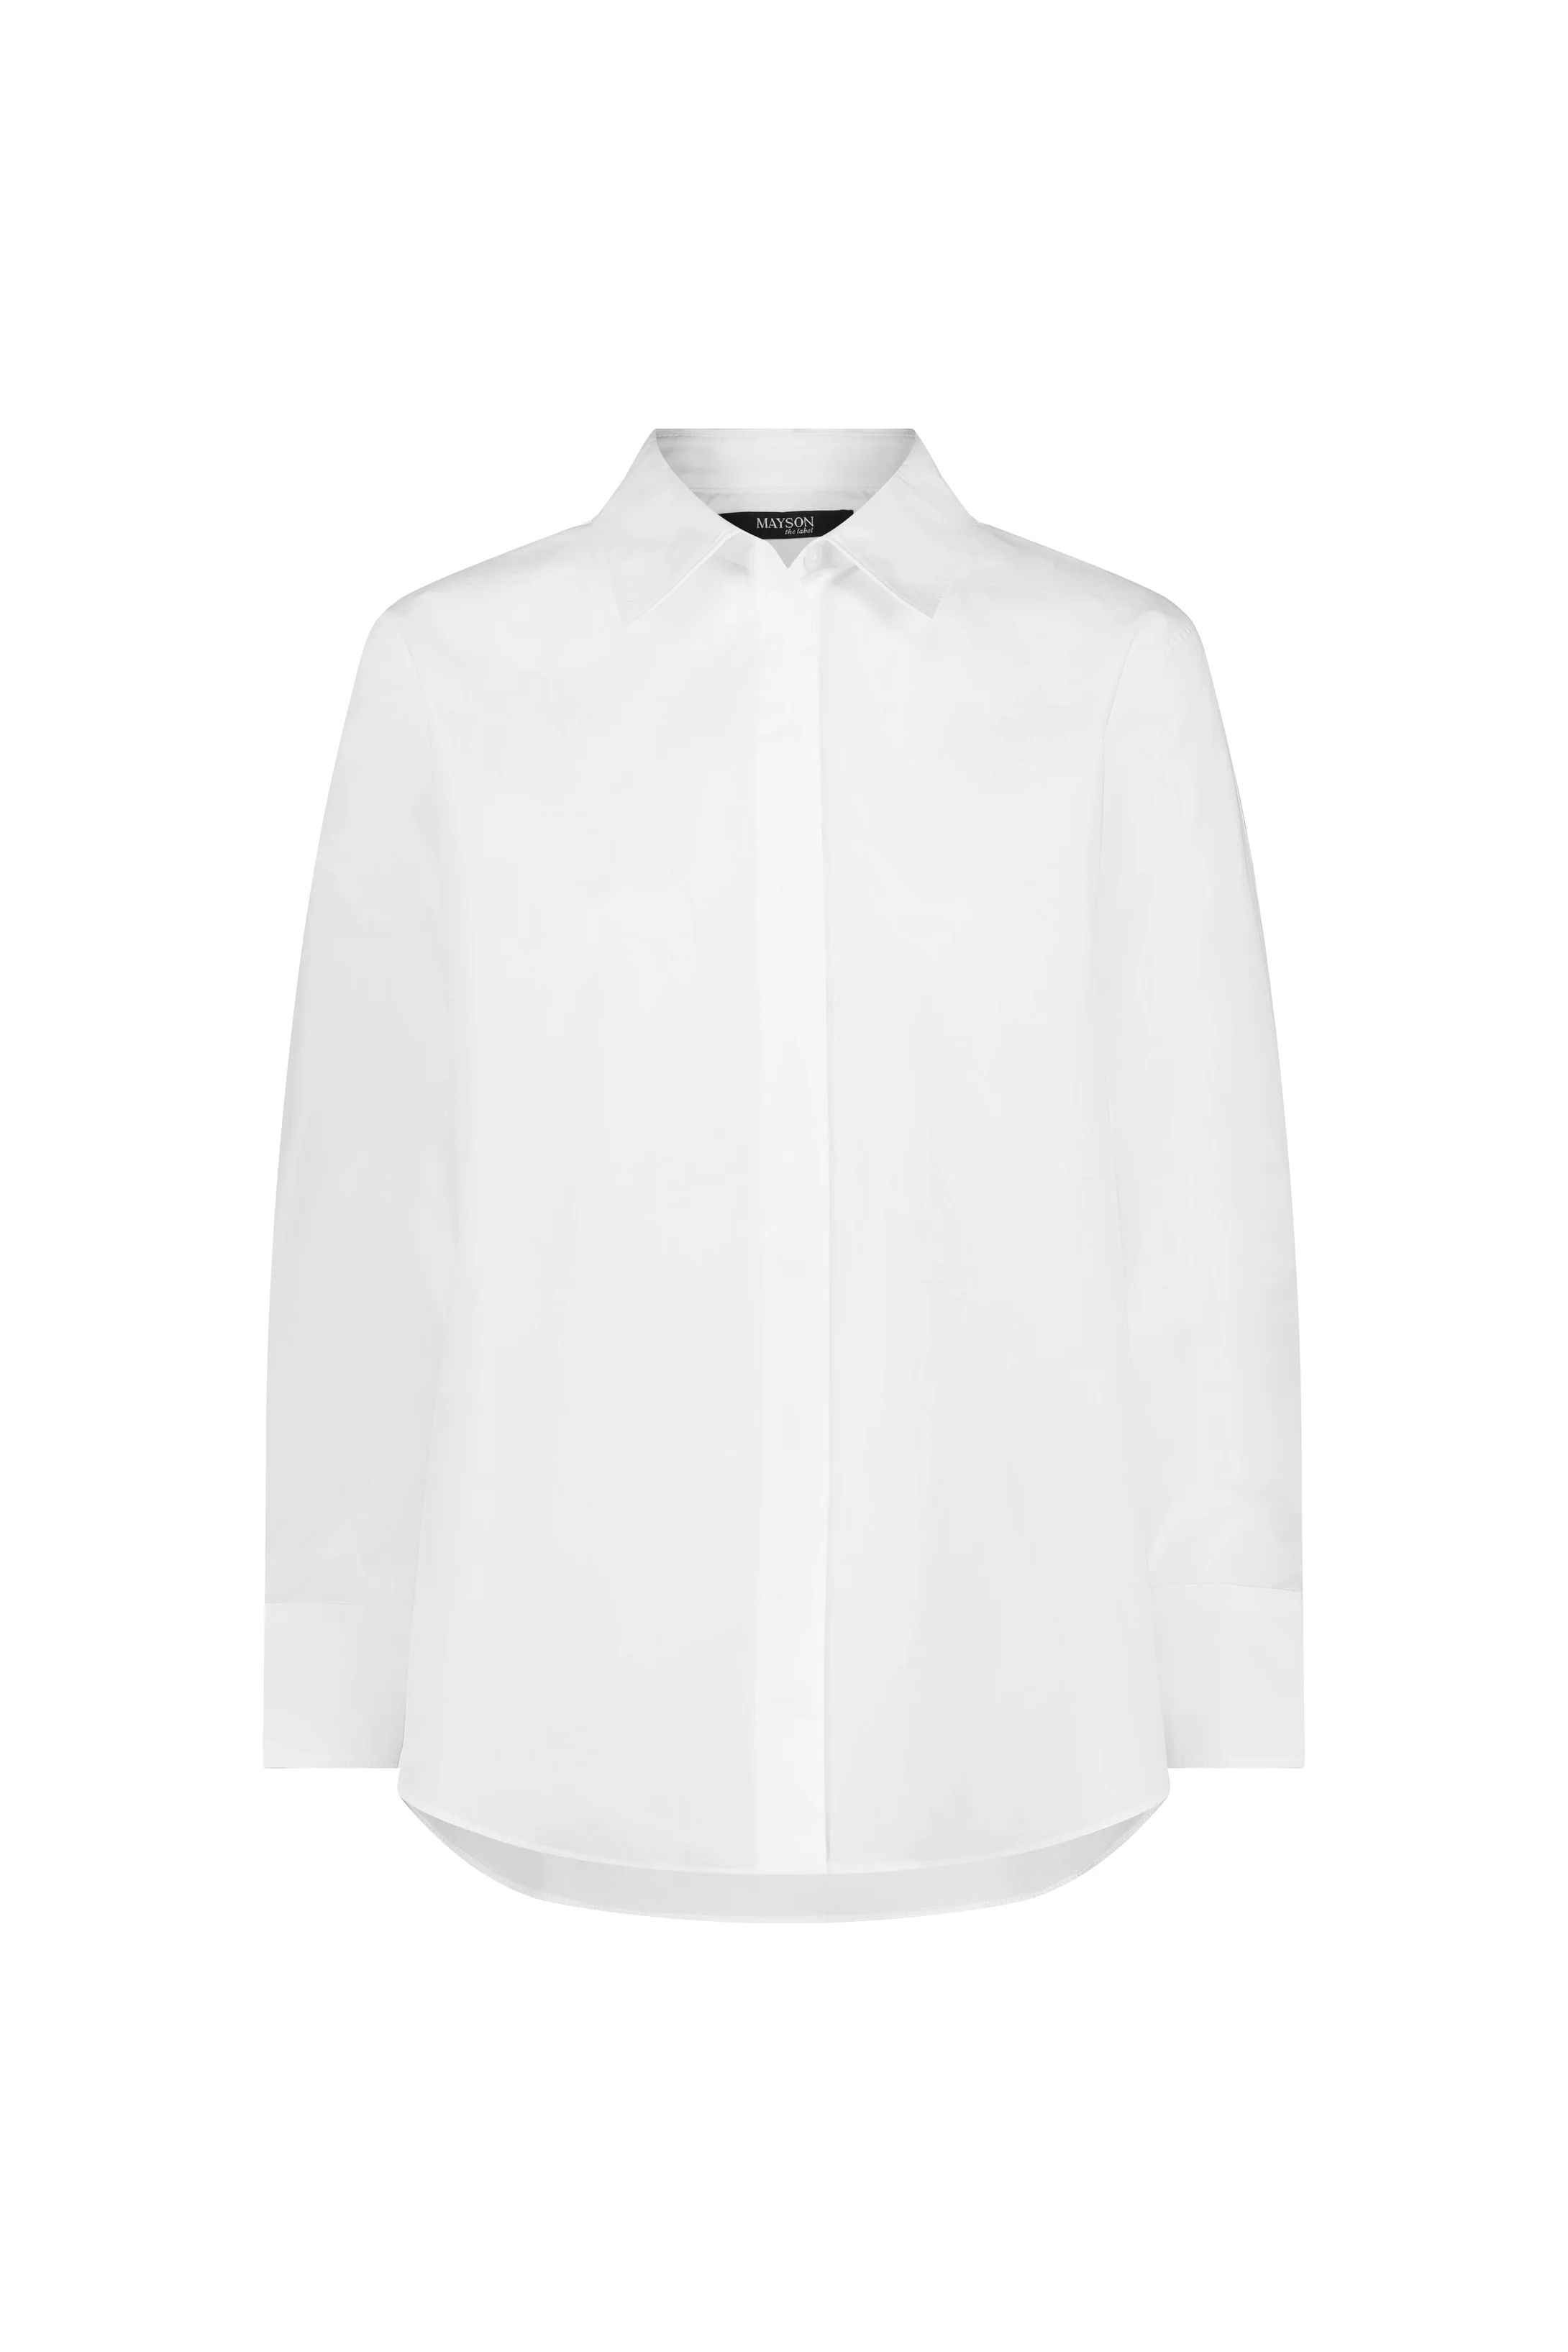 Classic Button-Up Shirt | MAYSON the label